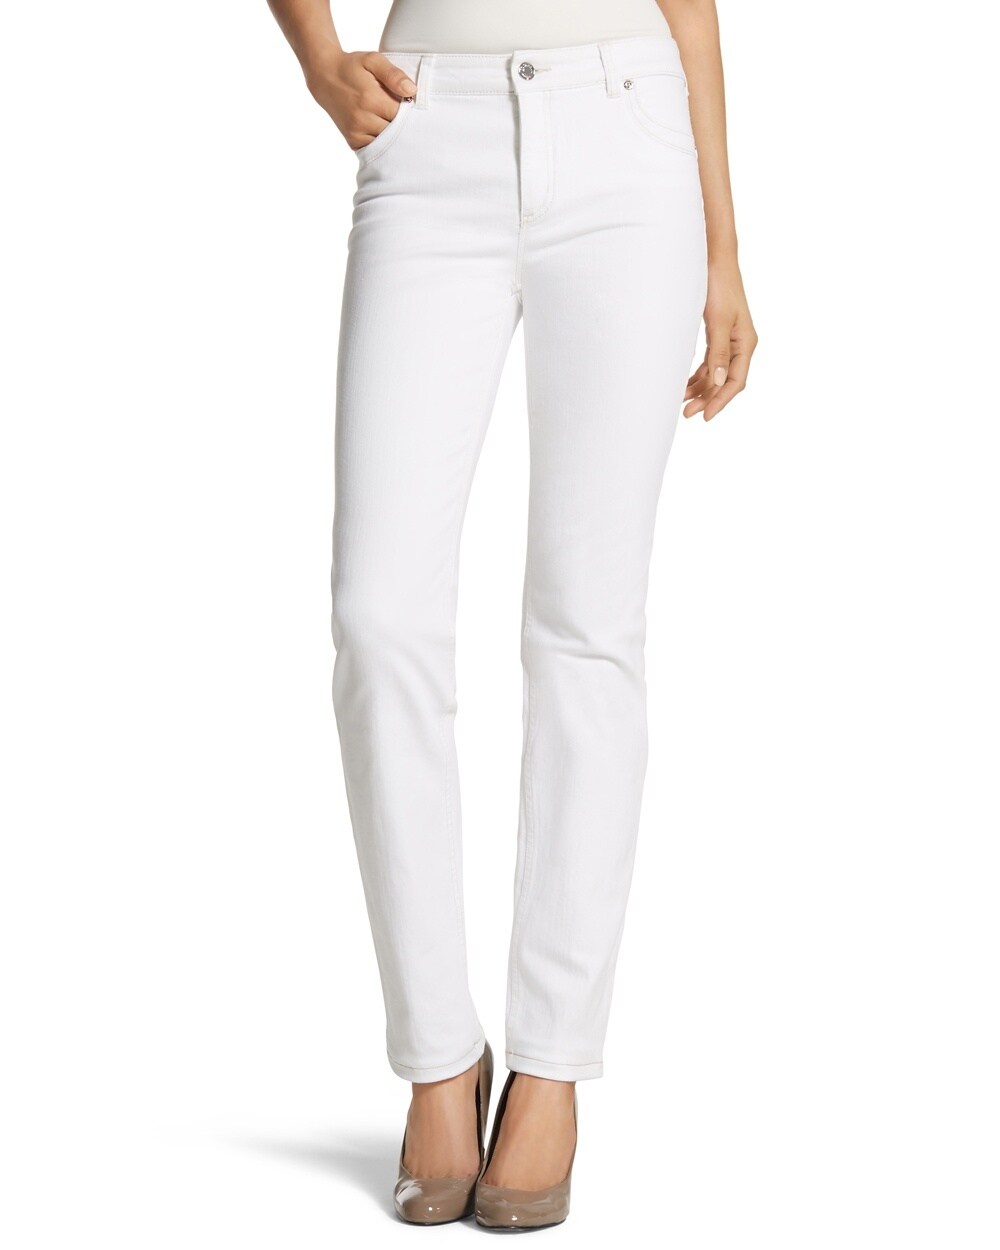 So Lifting Slim-Leg Jeans in Optic White - Chicos